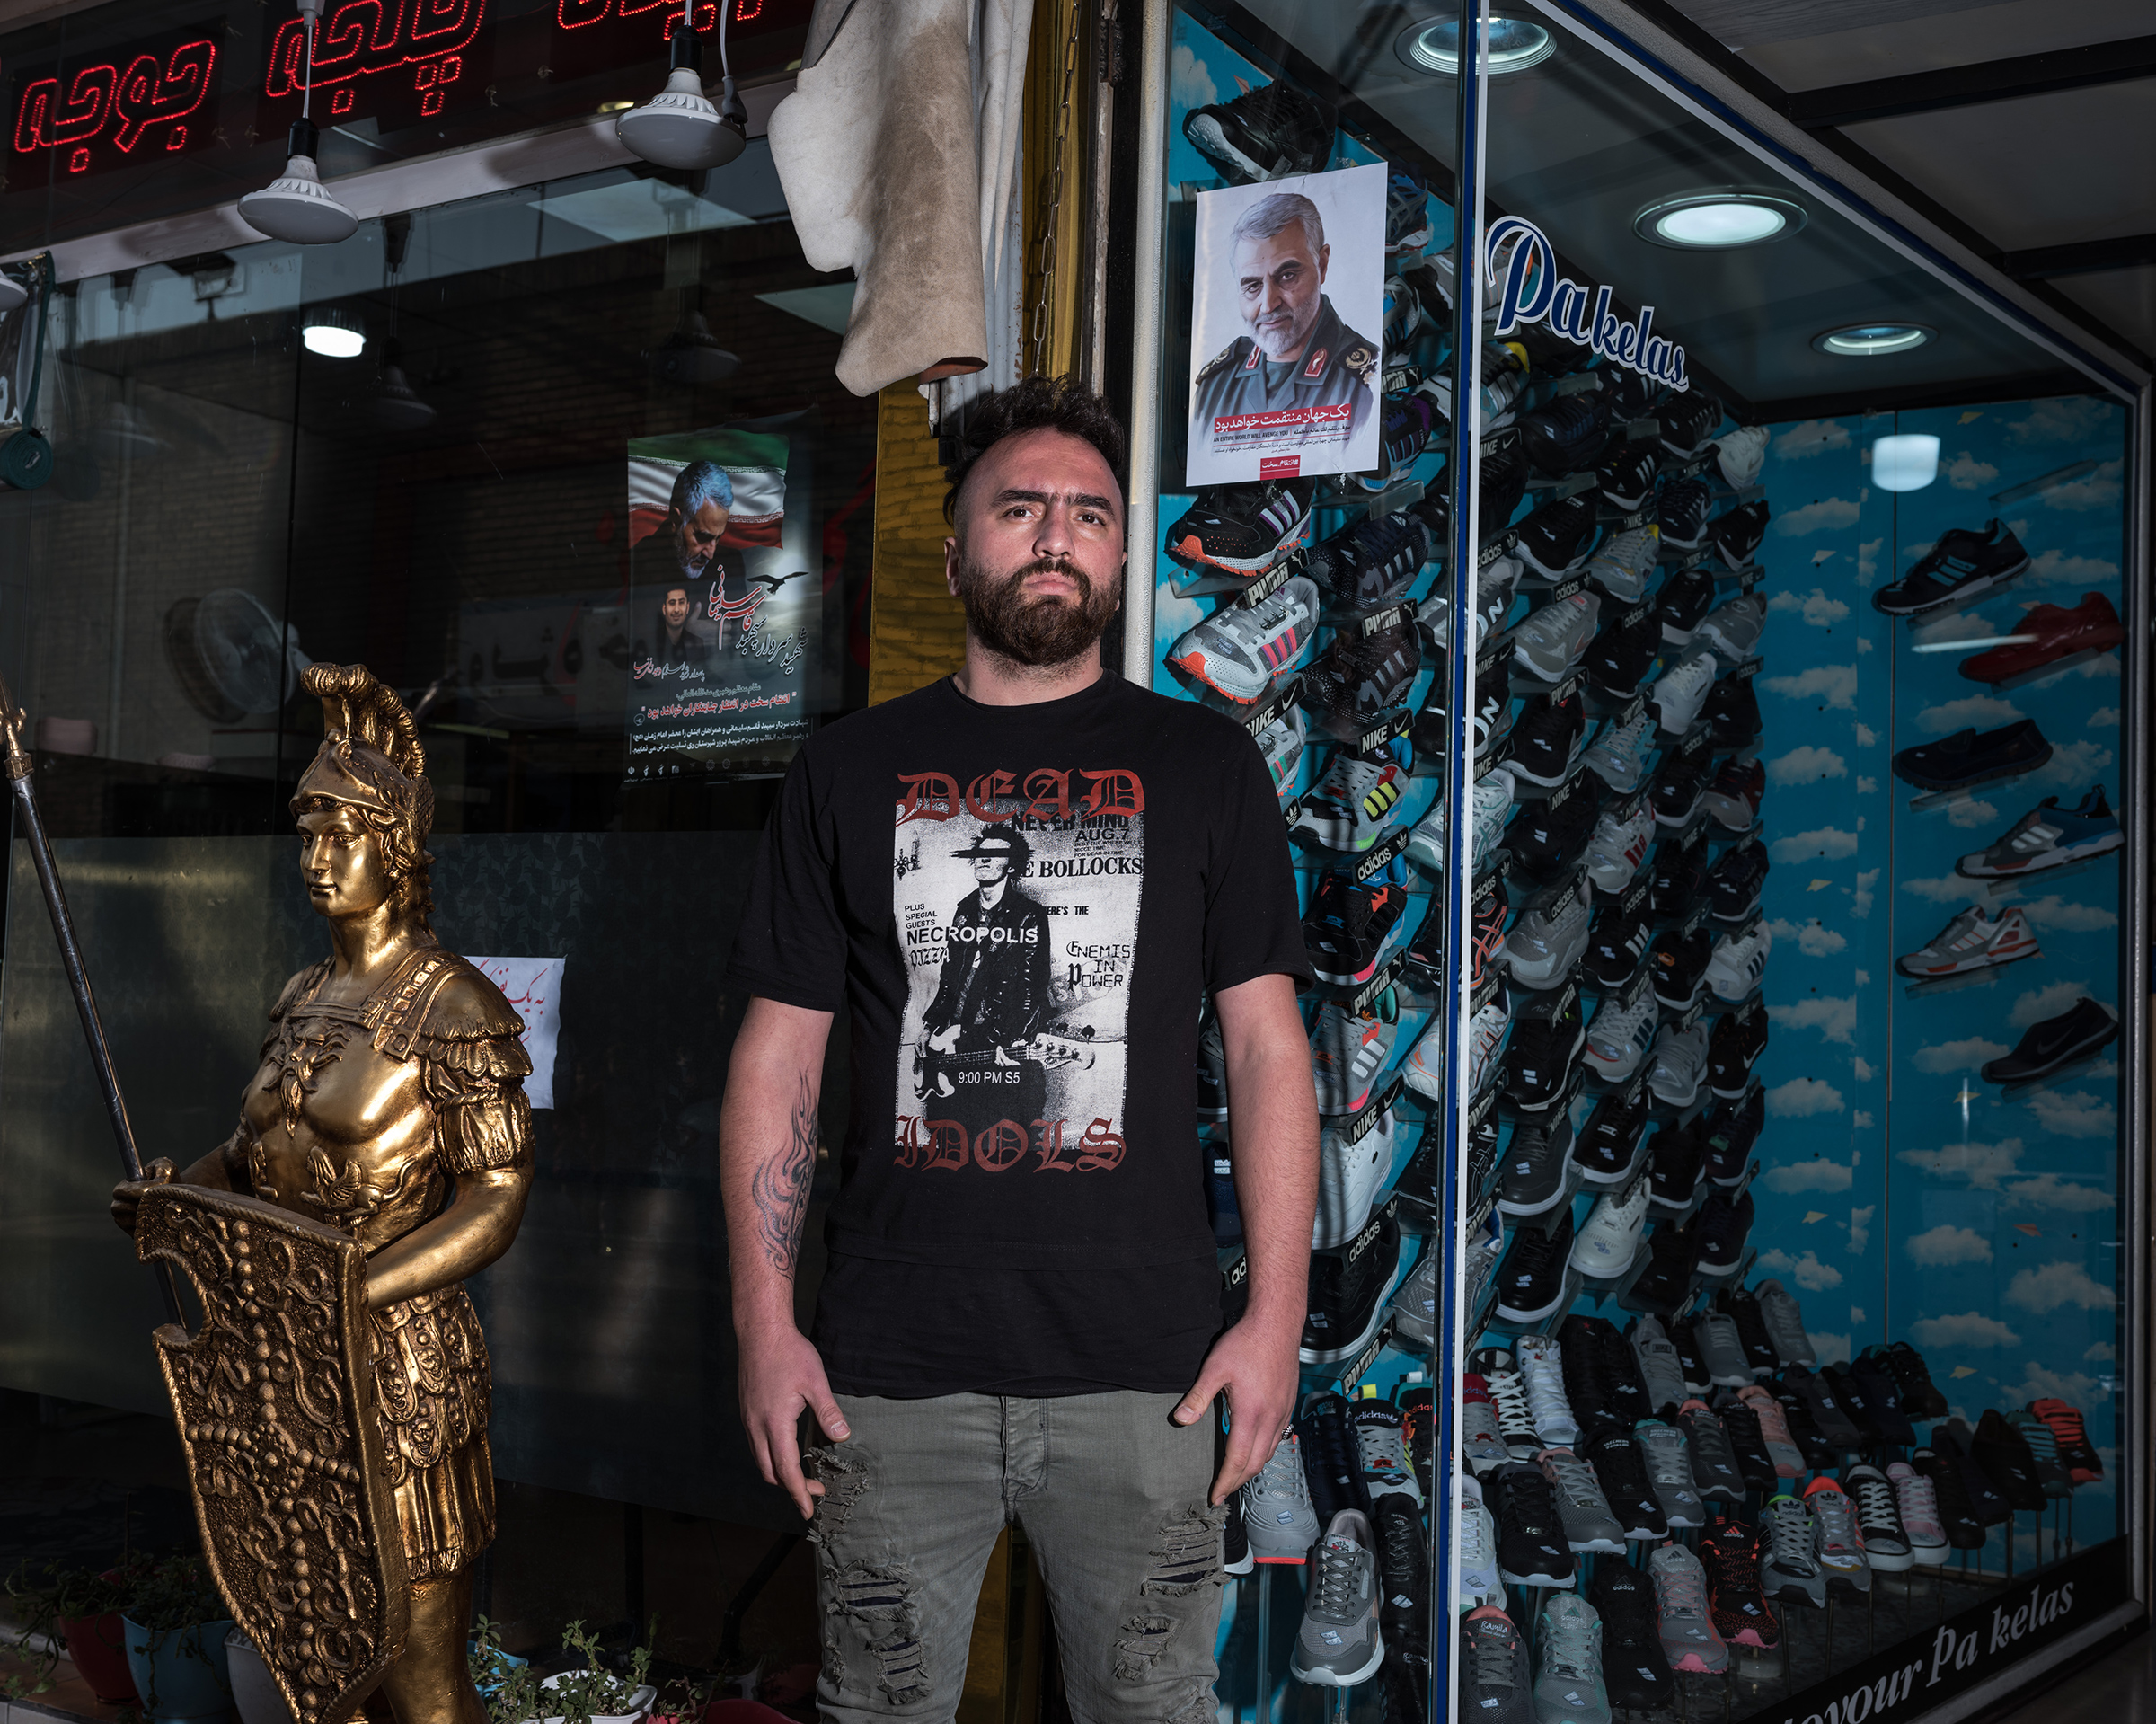 <strong>Ali</strong>, 29, sells shoes near the shrine to Shah Abdol Azim in Tehran. He hung a poster of Qasem Soleimani "out of respect for what he did for Iran." "'<a href="https://time.com/longform/qasem-soleimani-tehran-iran-photos/">The City Had Transformed.' Scenes From Tehran's Mass Mourning of Qasem Soleimani</a>," Jan. 10. (Newsha Tavakolian—Magnum Photos for TIME)